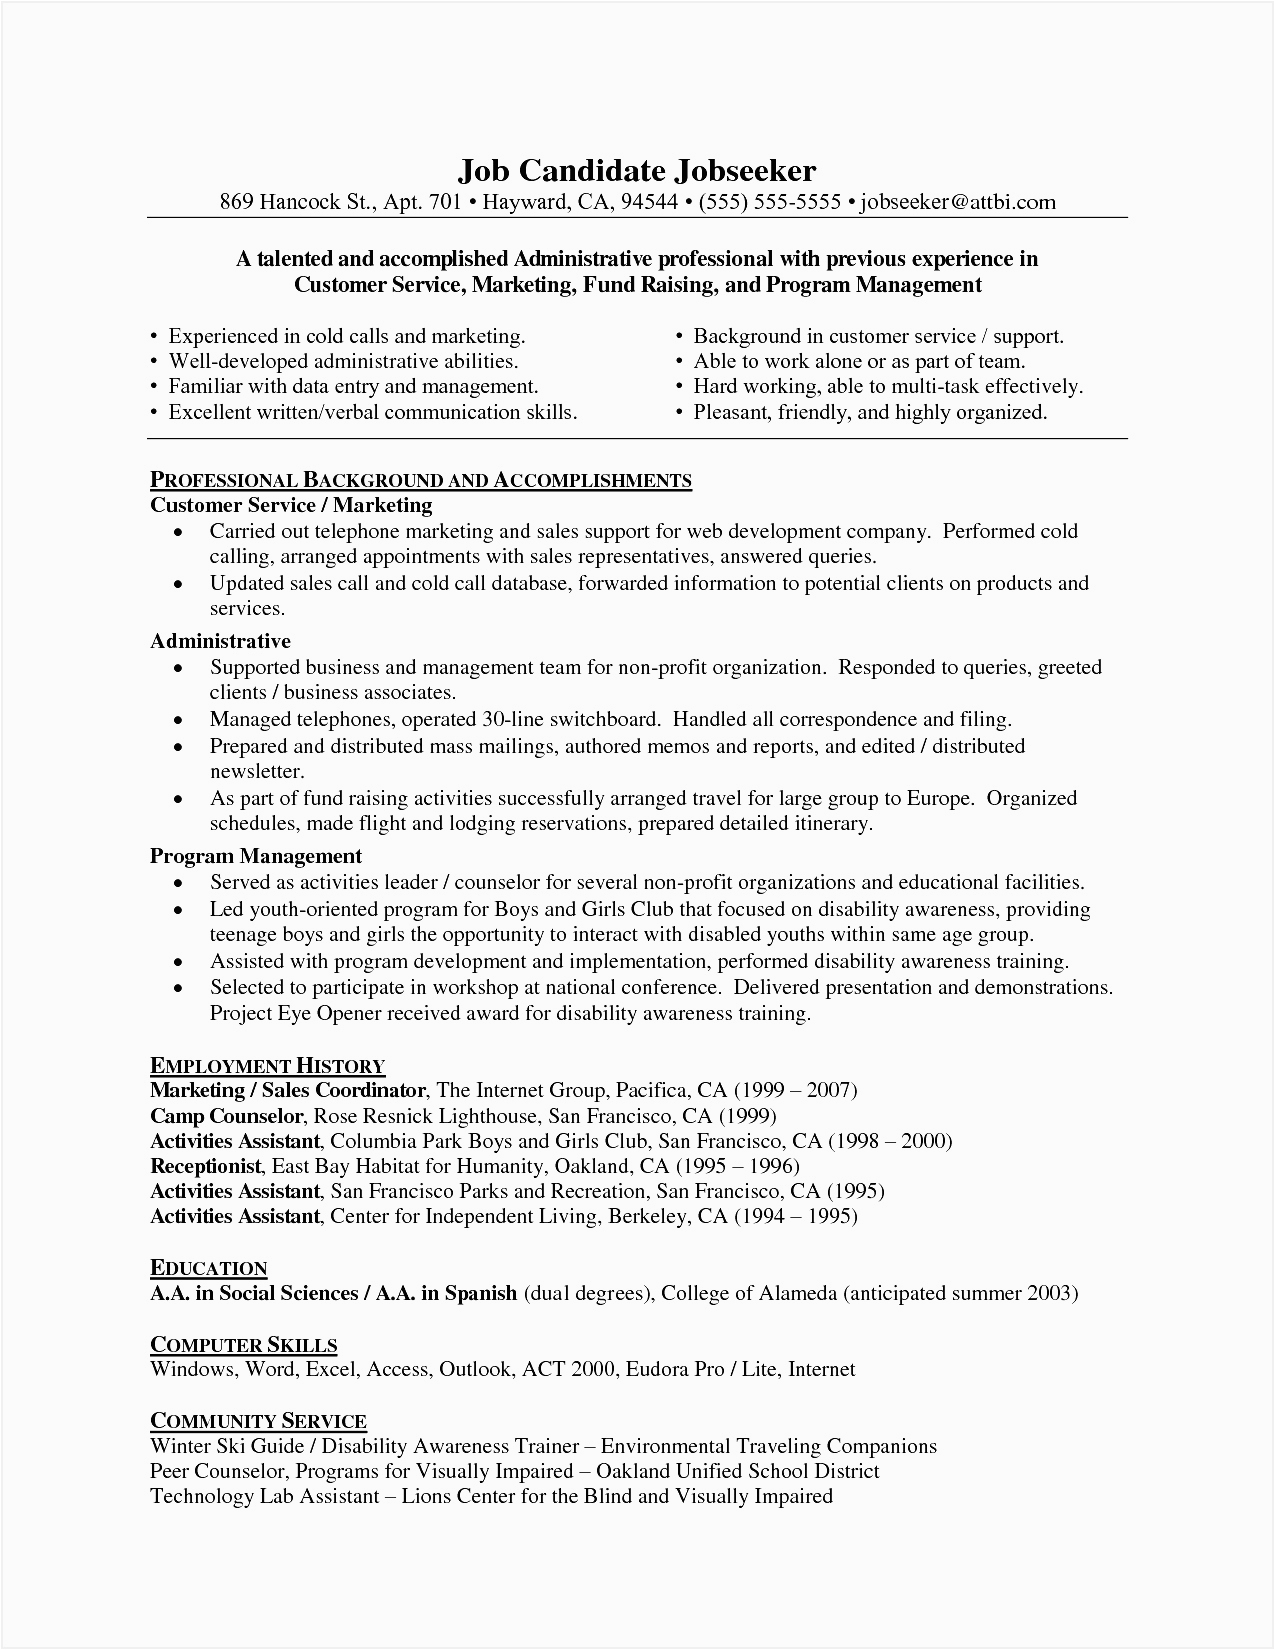 Sample Resume for A Customer Service No Experience 7 Cv Template No Experience